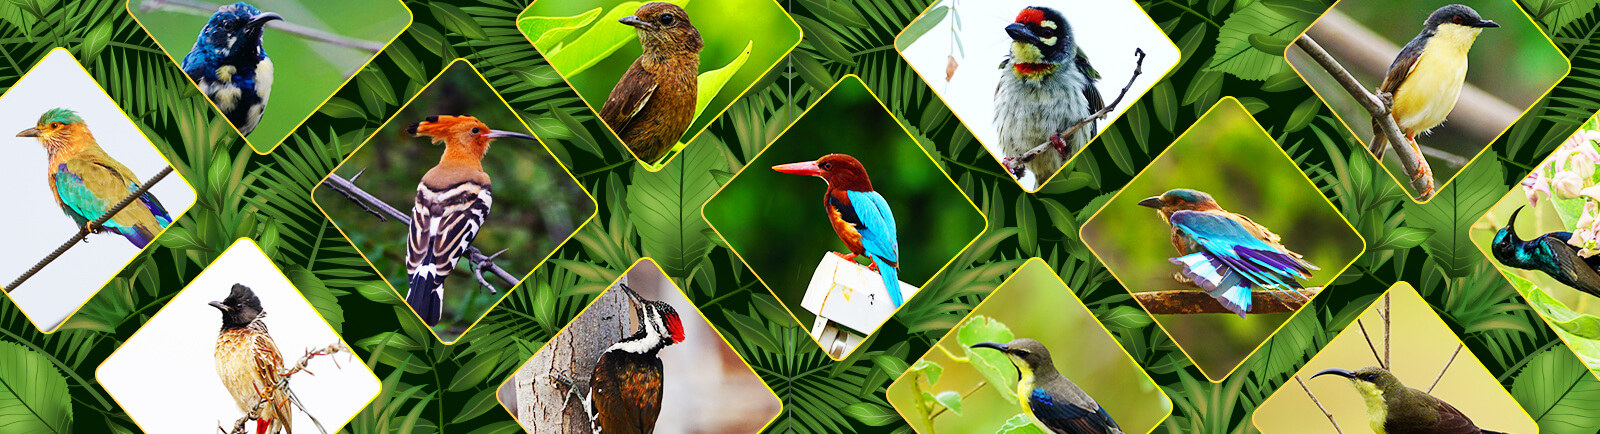 Versa Drives Private Limited Factory Coimbatore - birds and animals